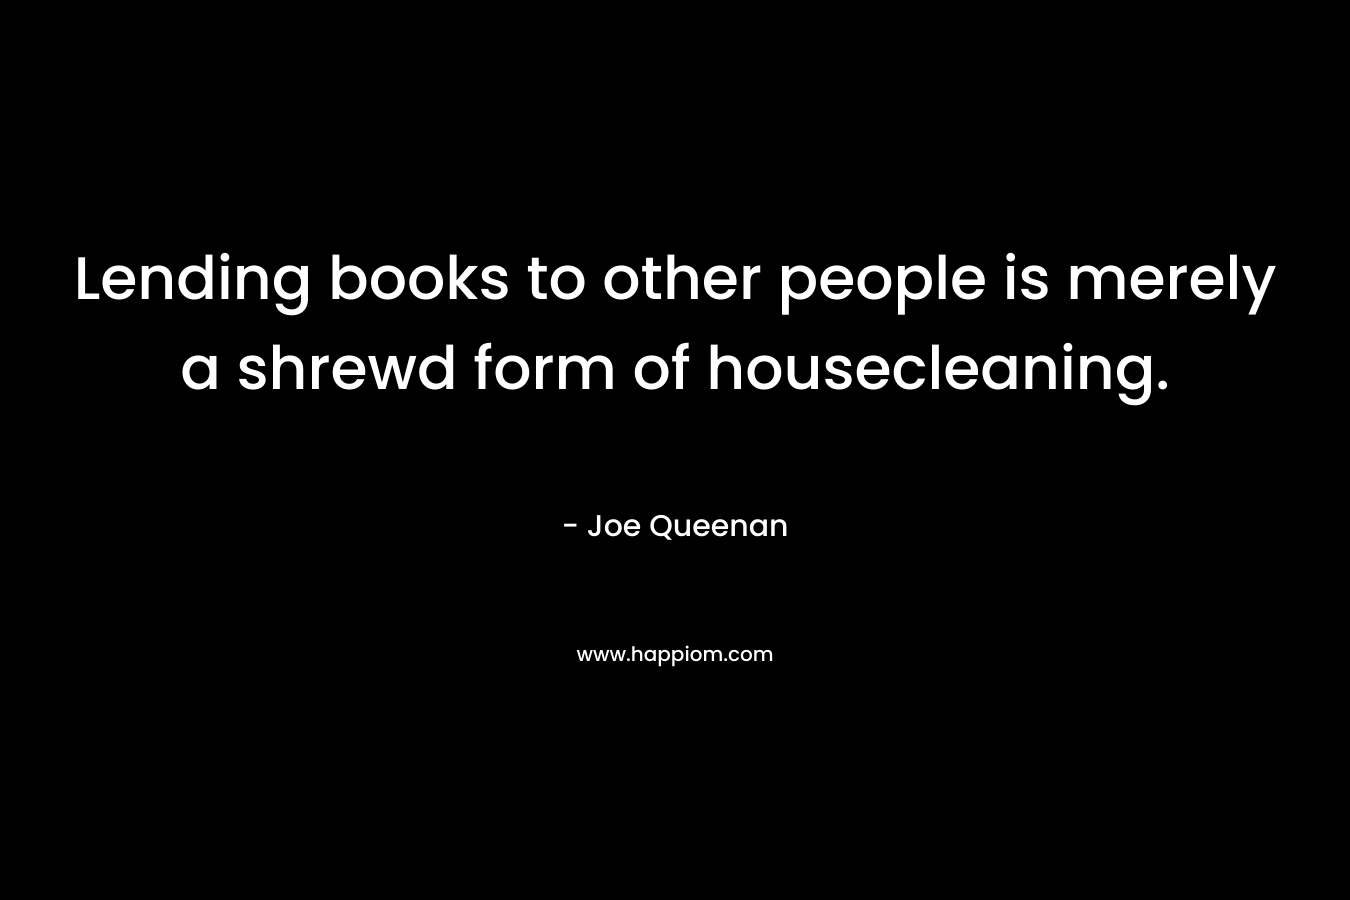 Lending books to other people is merely a shrewd form of housecleaning. – Joe Queenan